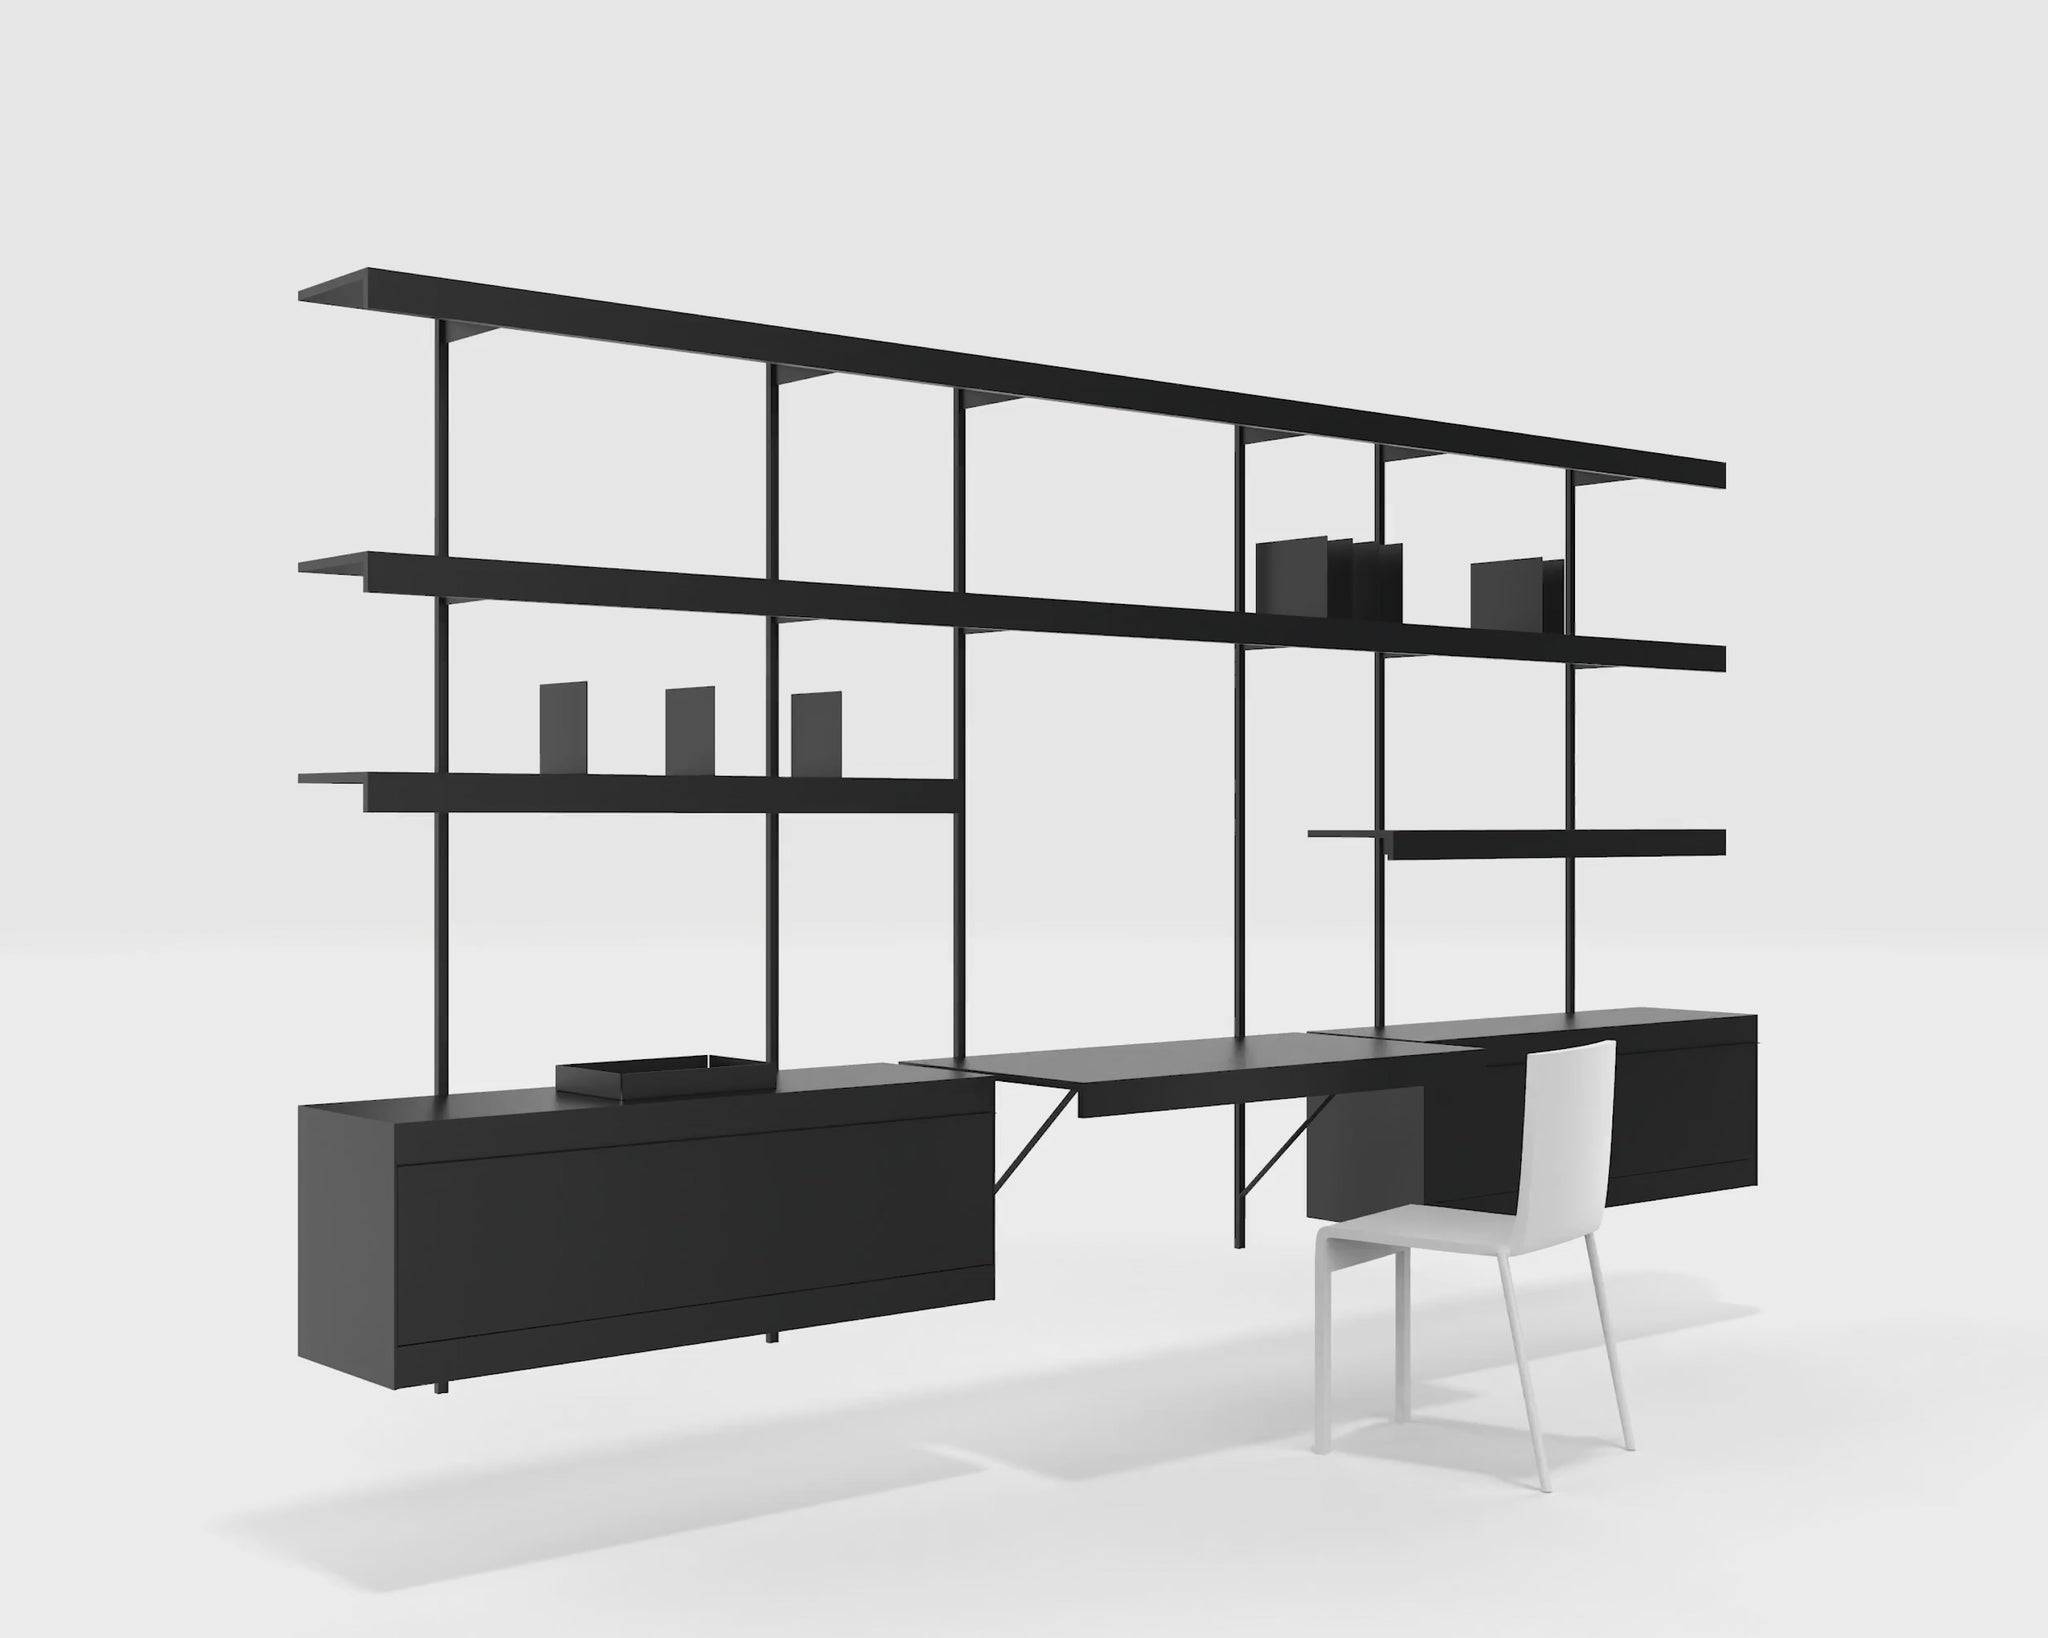 ON&ON wall mounted shelving system assembly and finishes animation